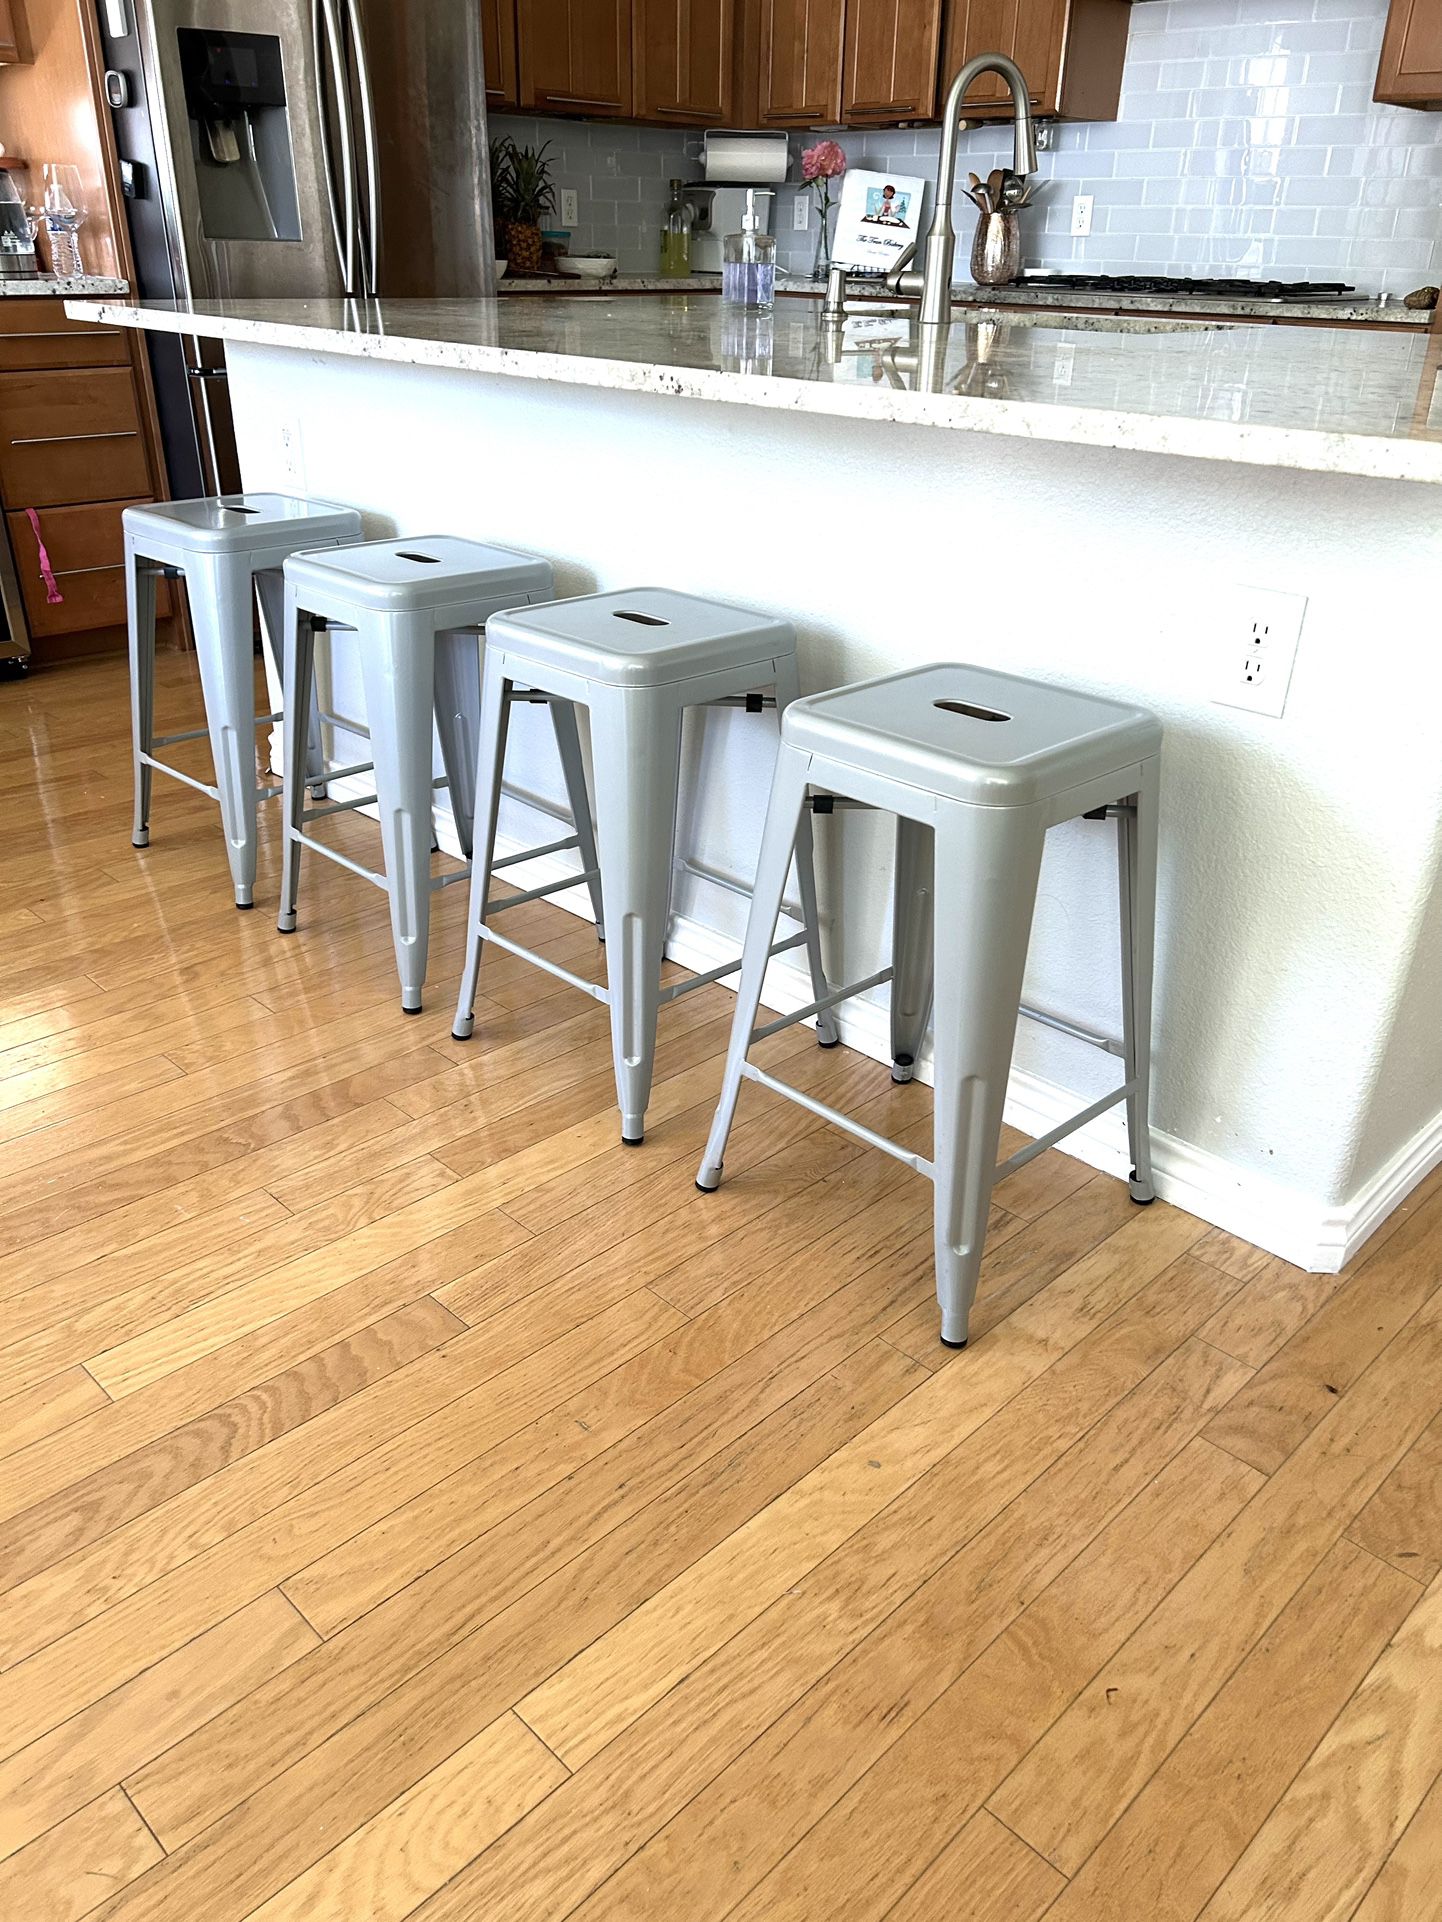 4 Silver Rustic Industrial Counter Height Barstools 